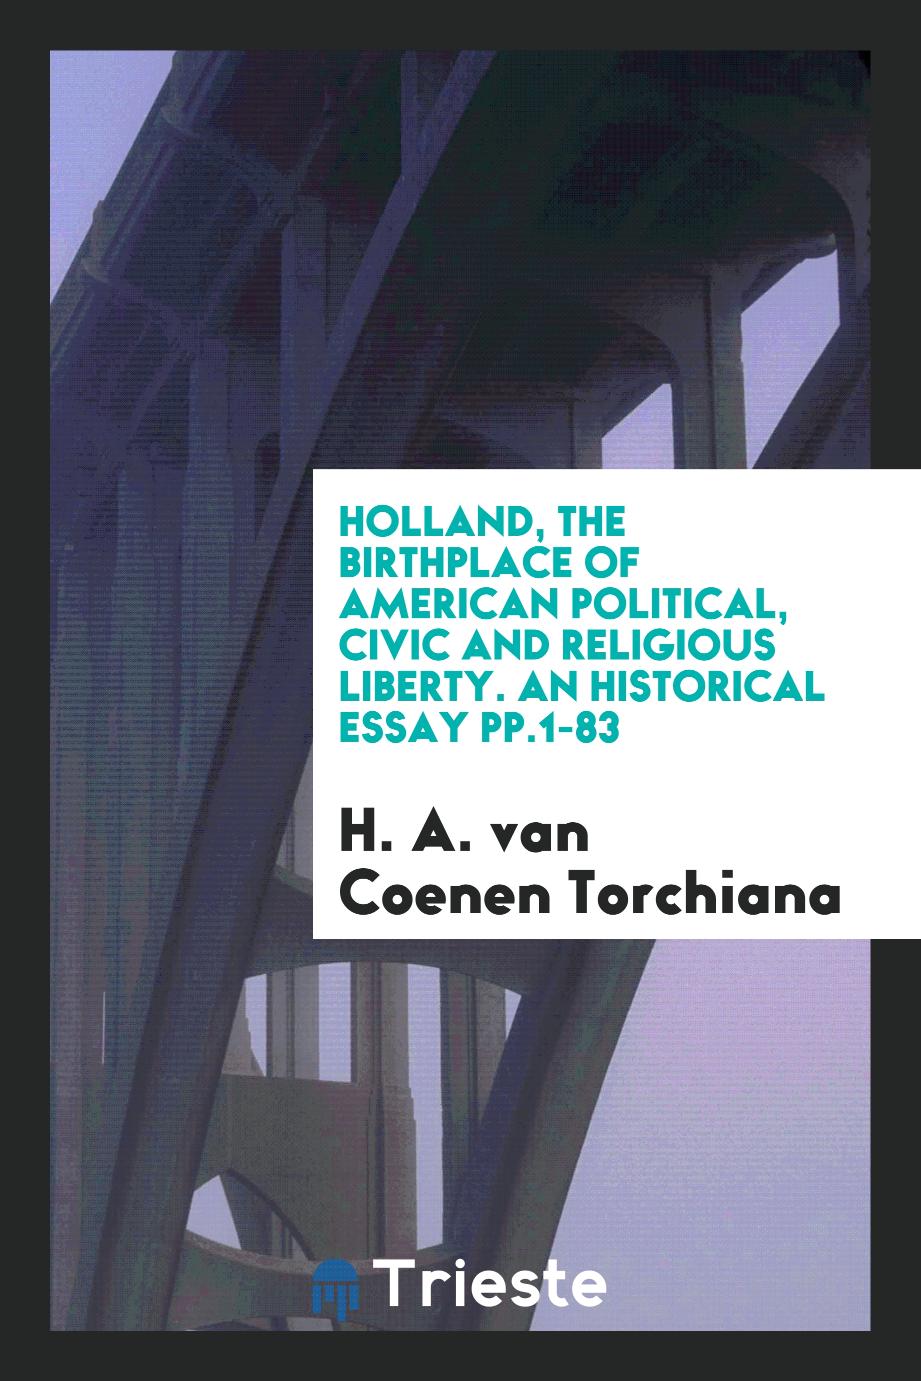 Holland, the Birthplace of American Political, Civic and Religious Liberty. An Historical Essay pp.1-83